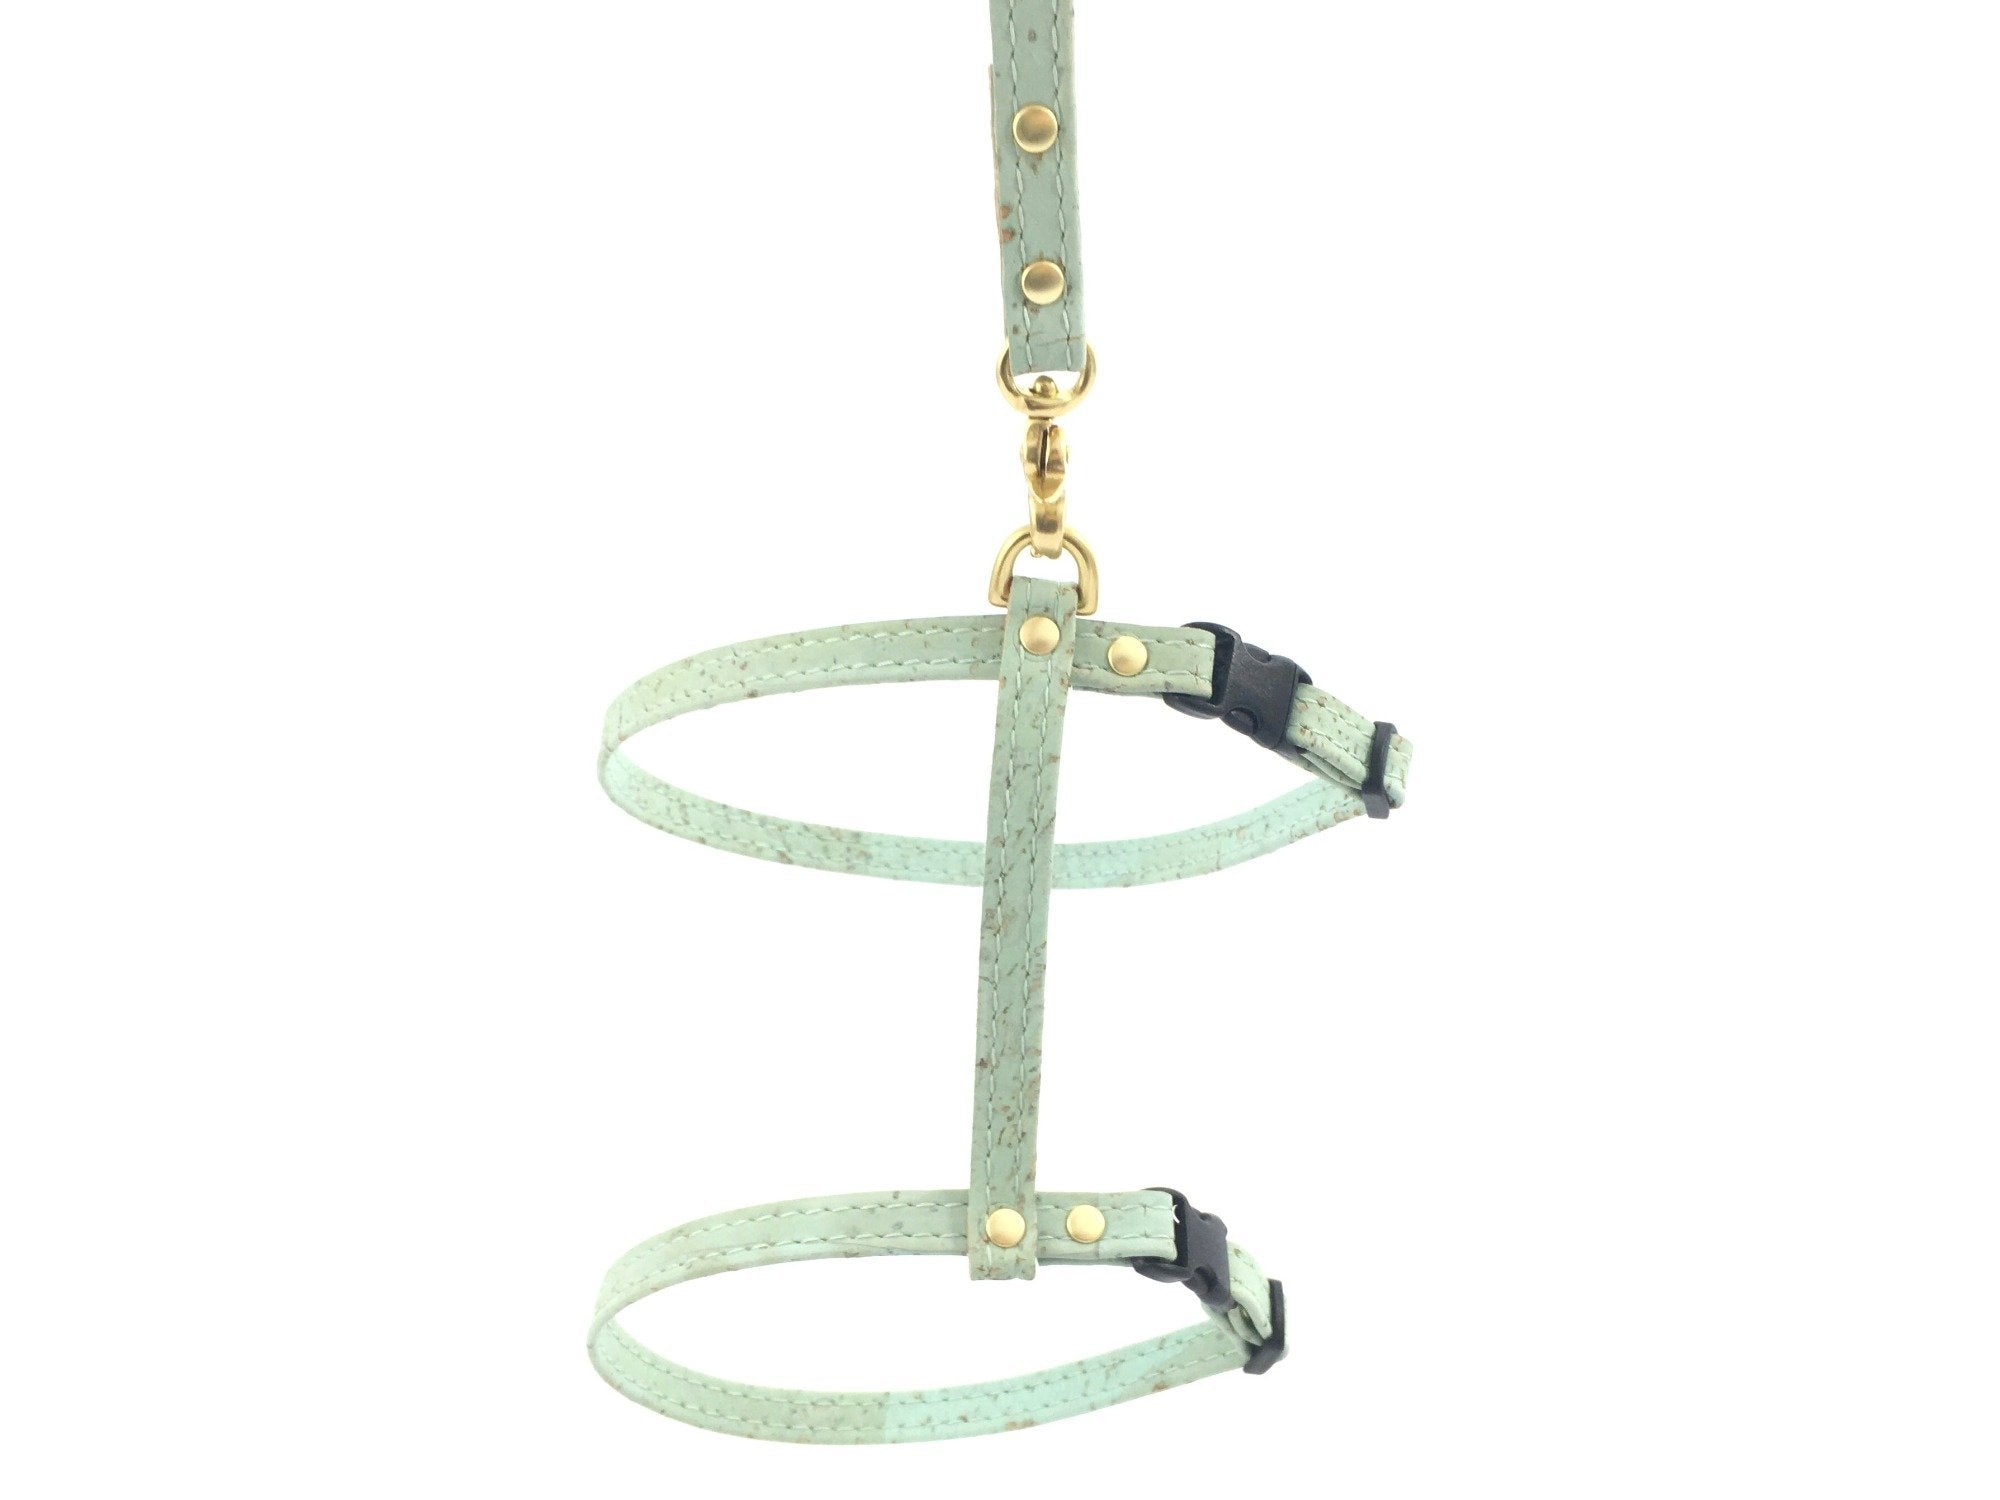 cat harness and leash in luxury vegan cork 'leather' with solid brass hardware, available in white, orange, green, pink, yellow and turquoise blue